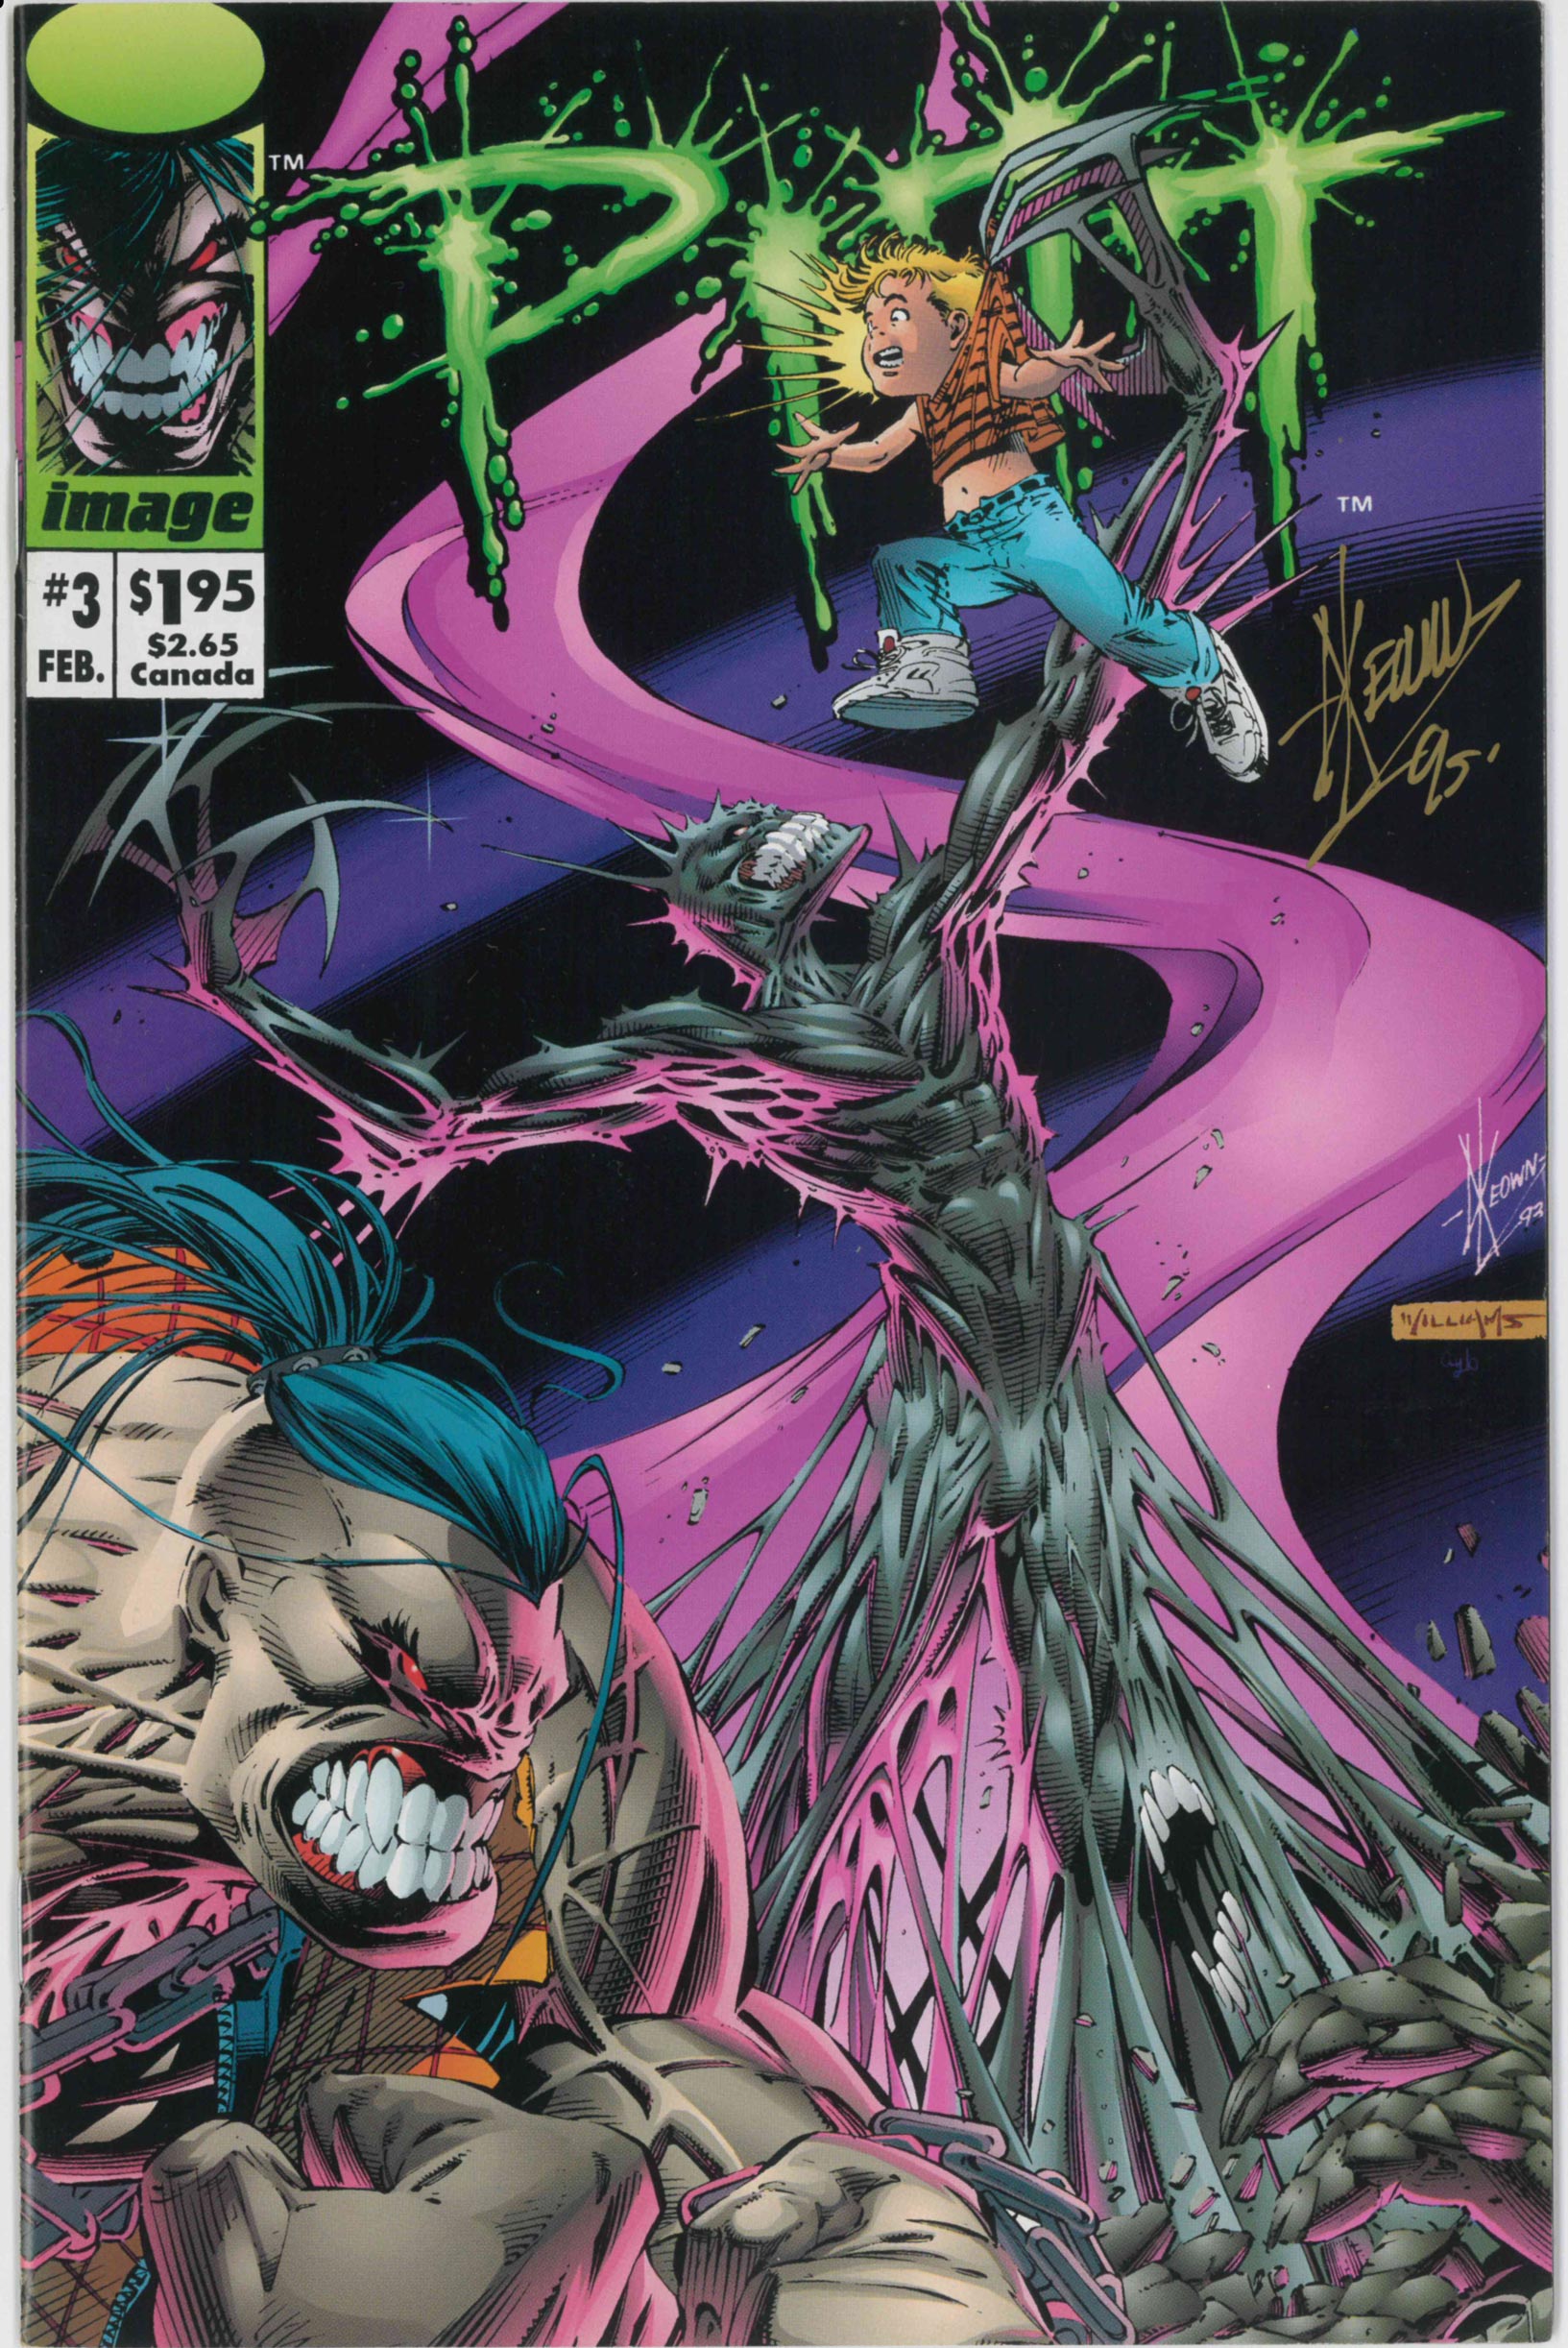 PITT (1993) #3 - SIGNED BY DALE KEOWN